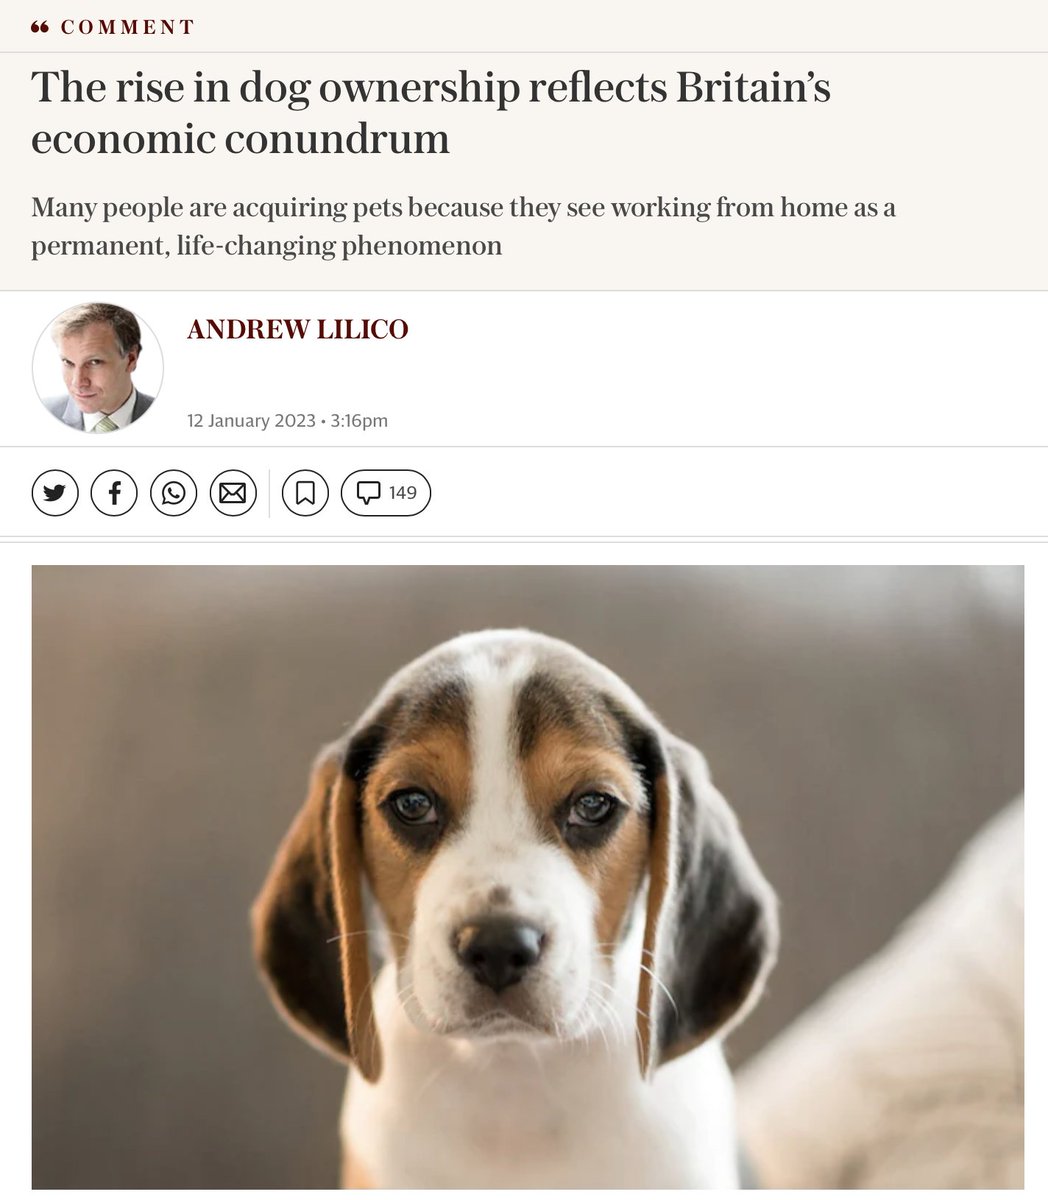 A thread on the Telegraph's epic war on working-from-home: just a *selection* of the anti-WFH articles in 'Britain's Best Quality Newspaper' since January of this year Let's start with dogs, working from home is sending dog ownership to unsustainable levels